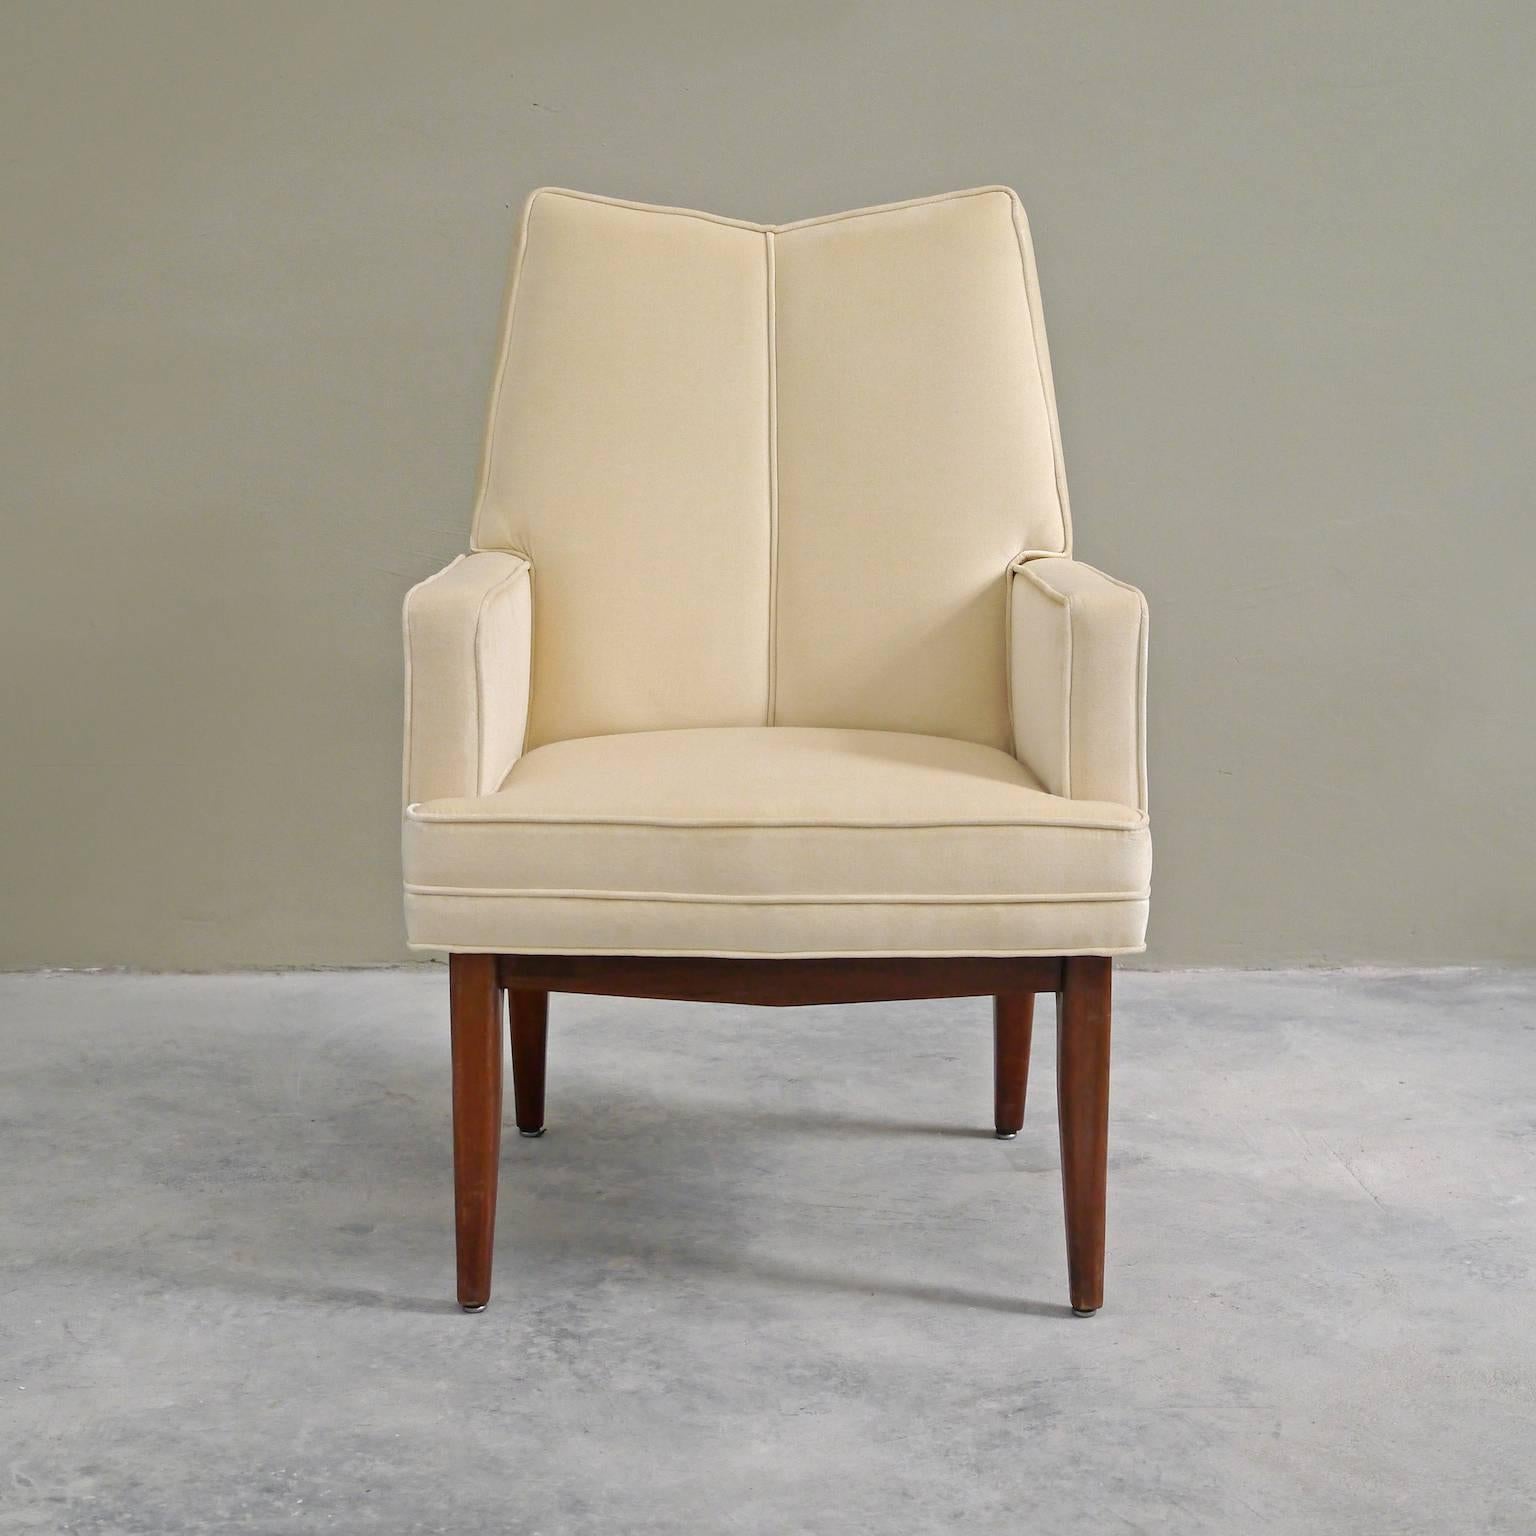 Sleek lines define this pair of newly produced chairs; from their V-form backs and vertical center seams, to their flared fruitwood legs. They are an homage to the influence of Mid-Century American design. Each chair is upholstered in creme colored